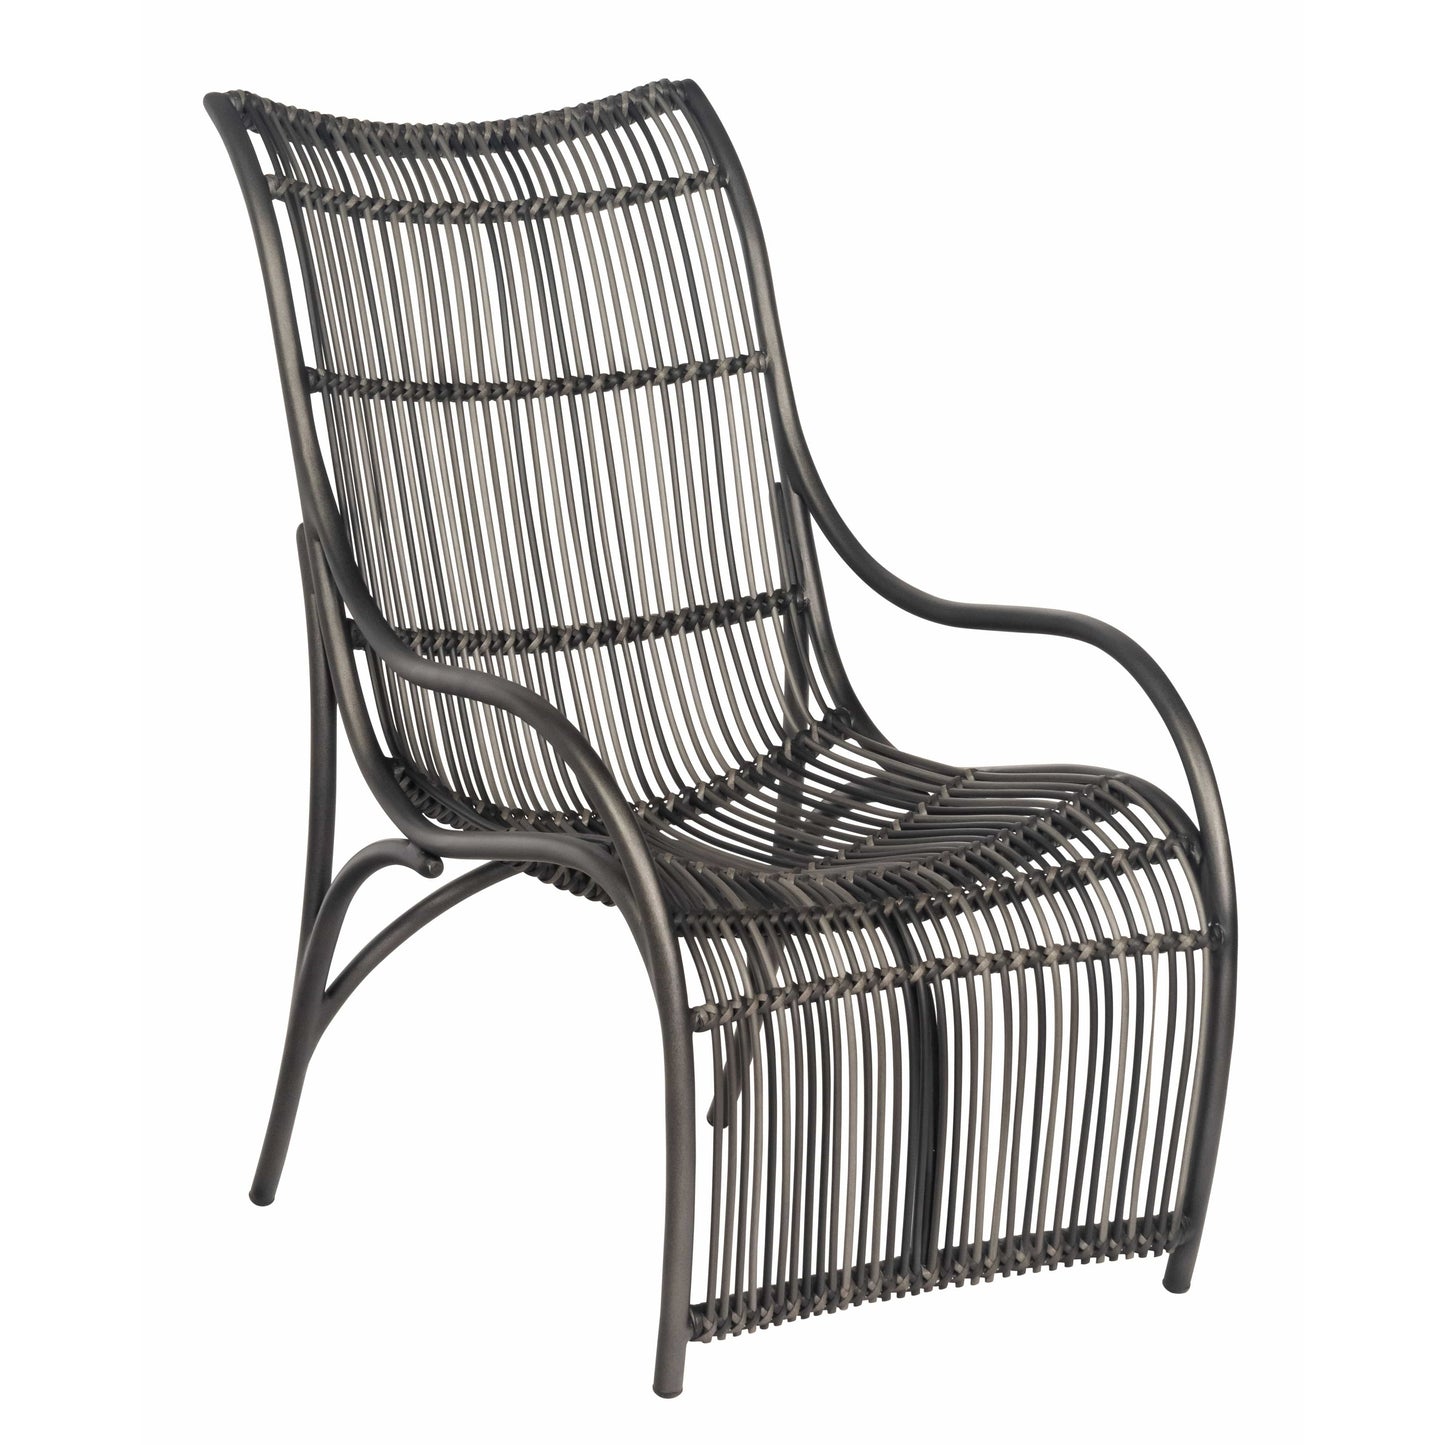 Cape Lounge Chair S508602 Woodard Outdoor Patio | Canaveral Collection Seating Woodard 